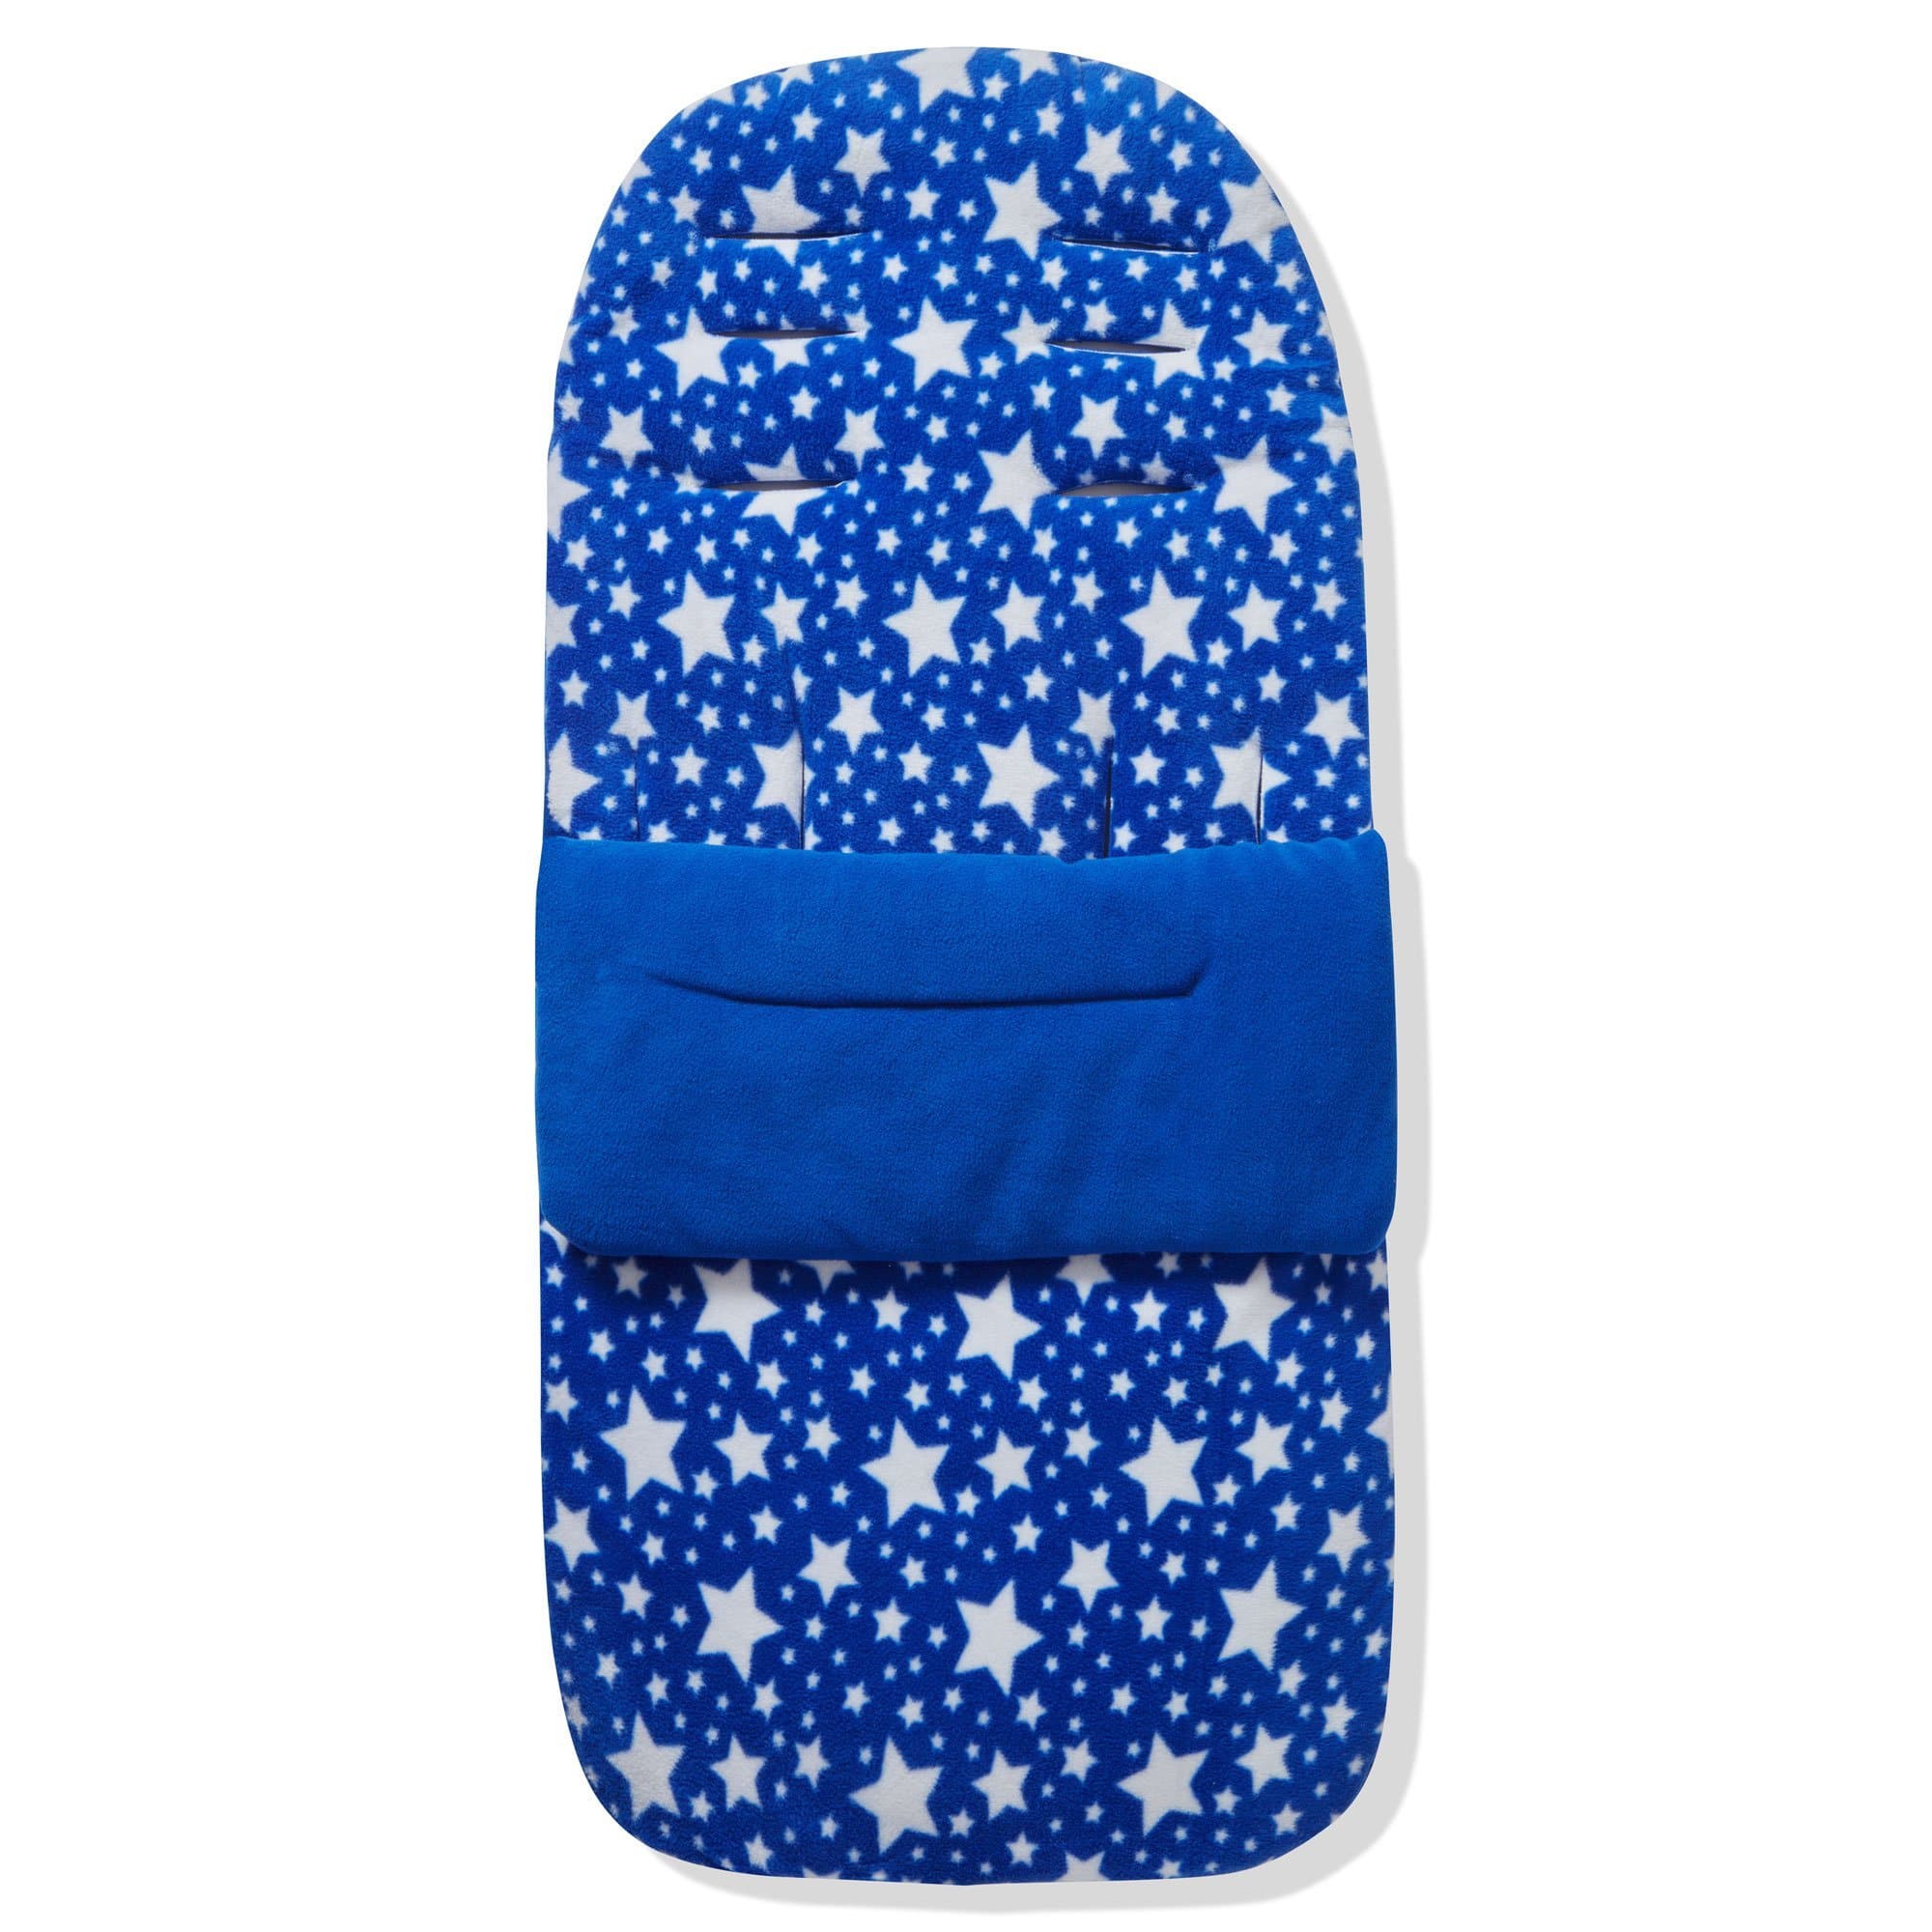 Fleece Footmuff / Cosy Toes Compatible with Mountain Buggy - Blue Star / Fits All Models | For Your Little One